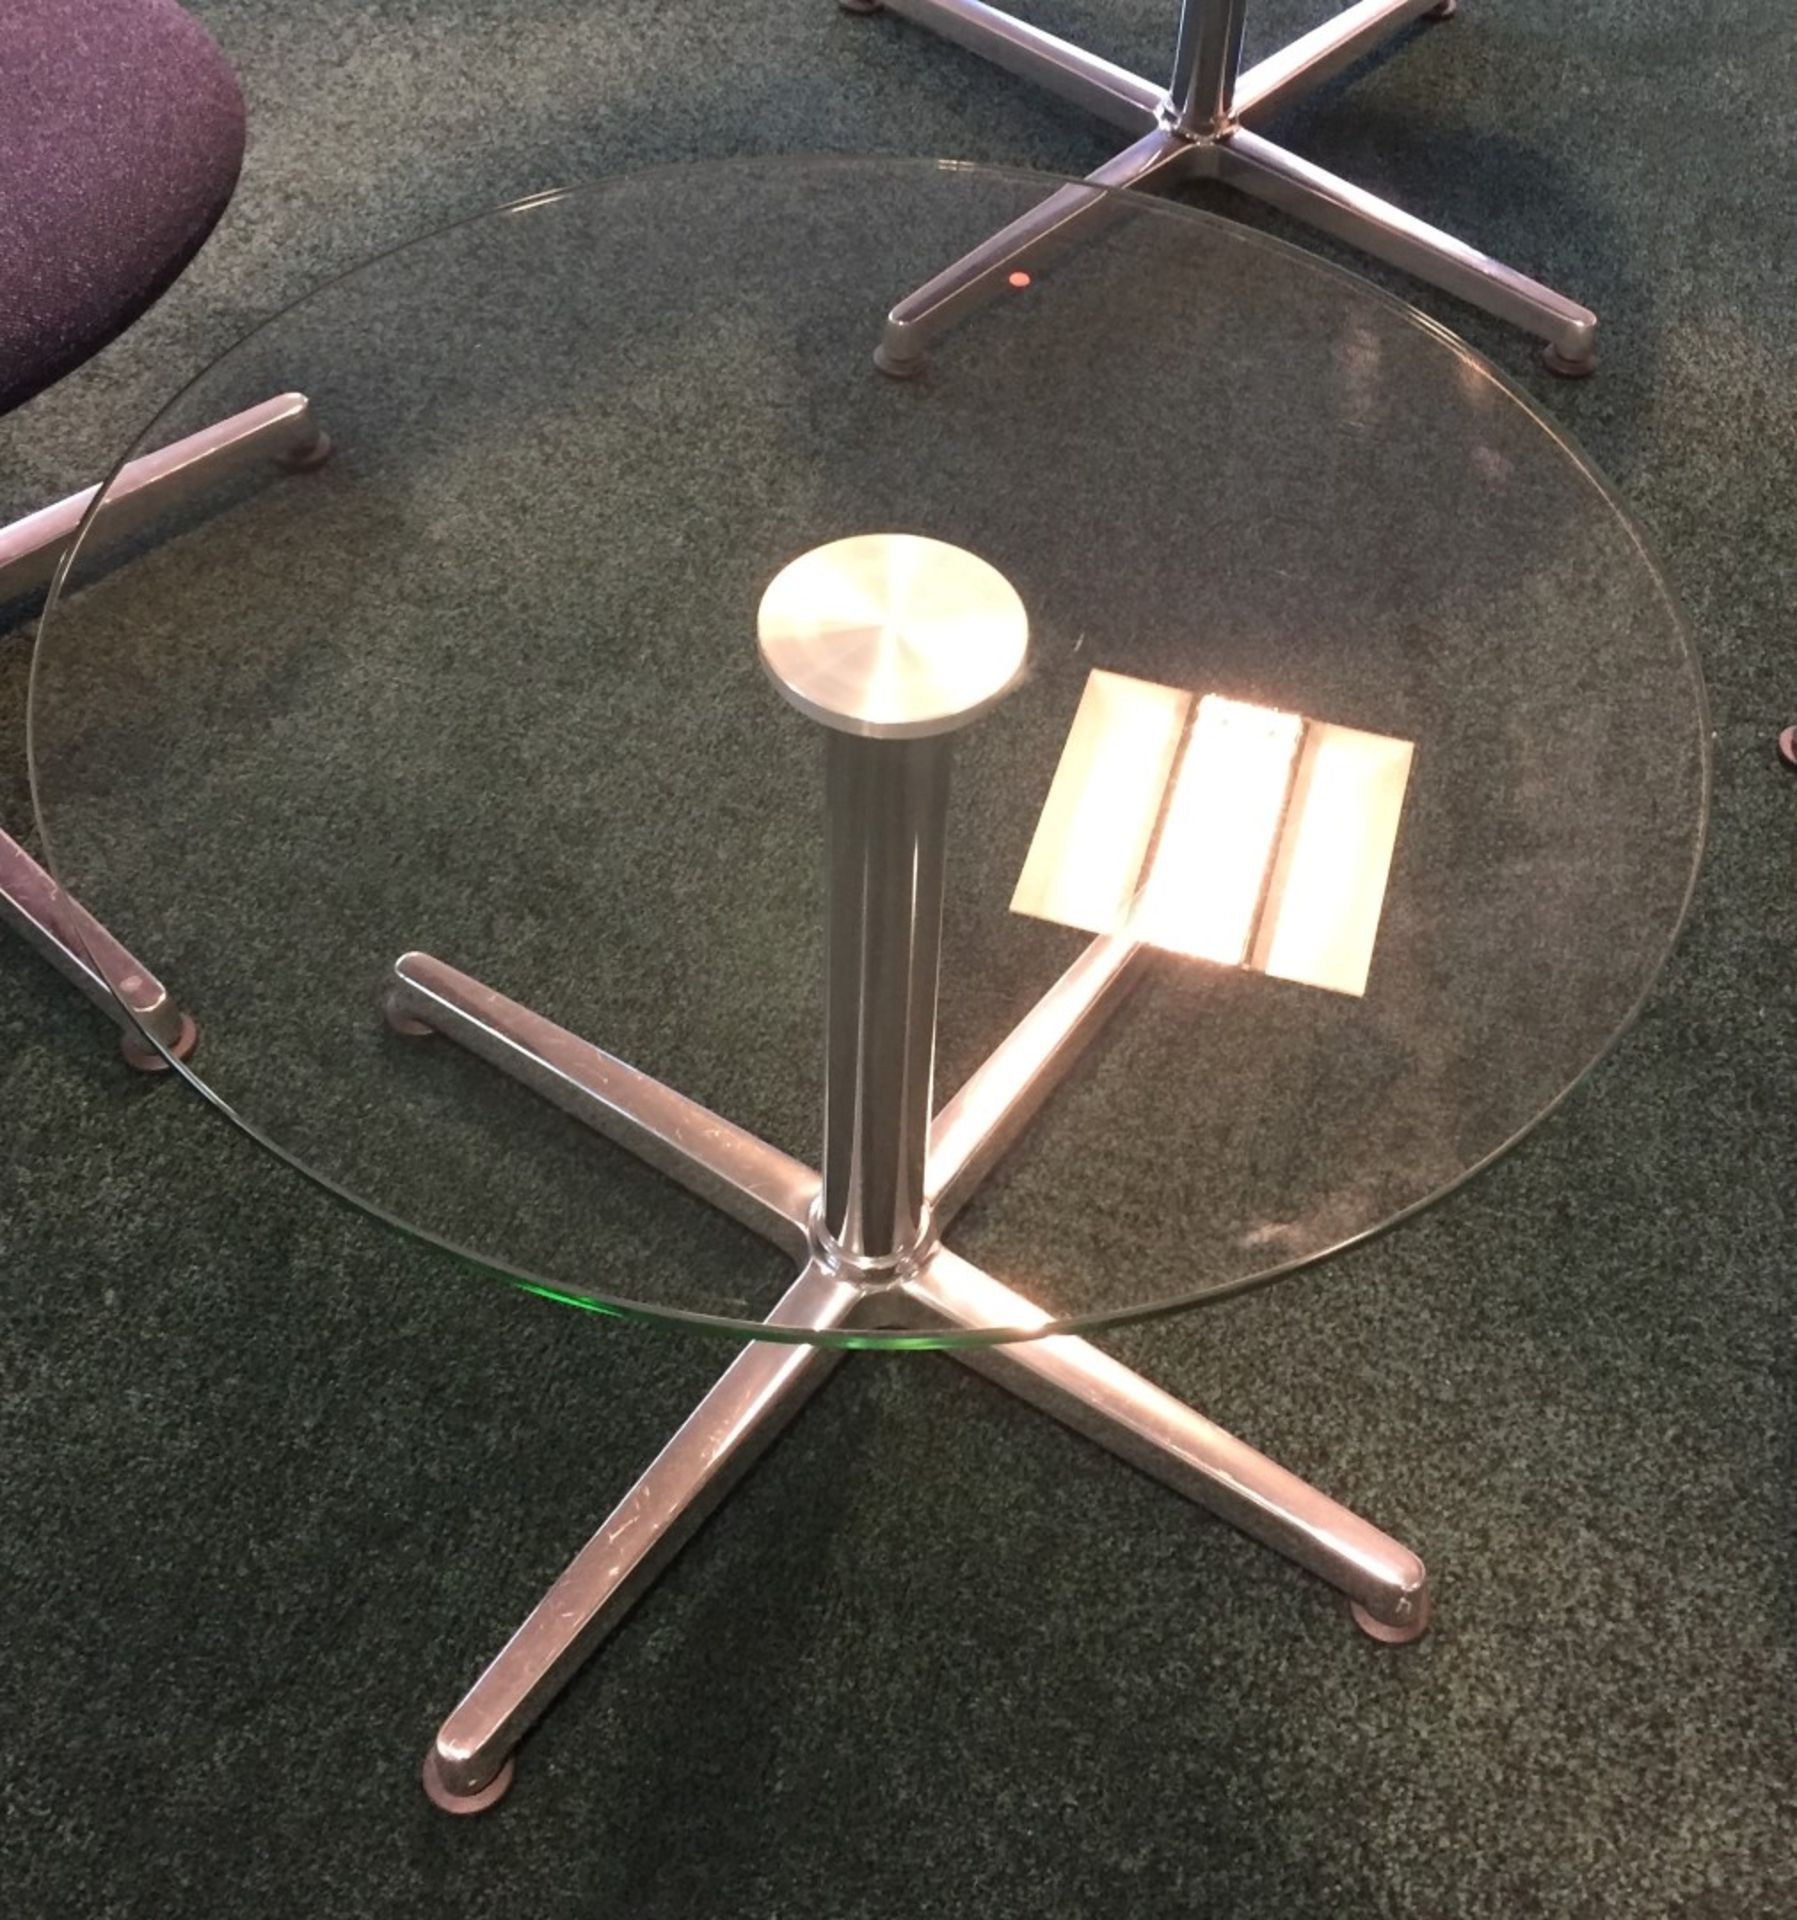 1 x Modern Coffee Table Featuring a Thick Round Glass Surface and Cross Feet Chrome Base - Premium - Image 2 of 2